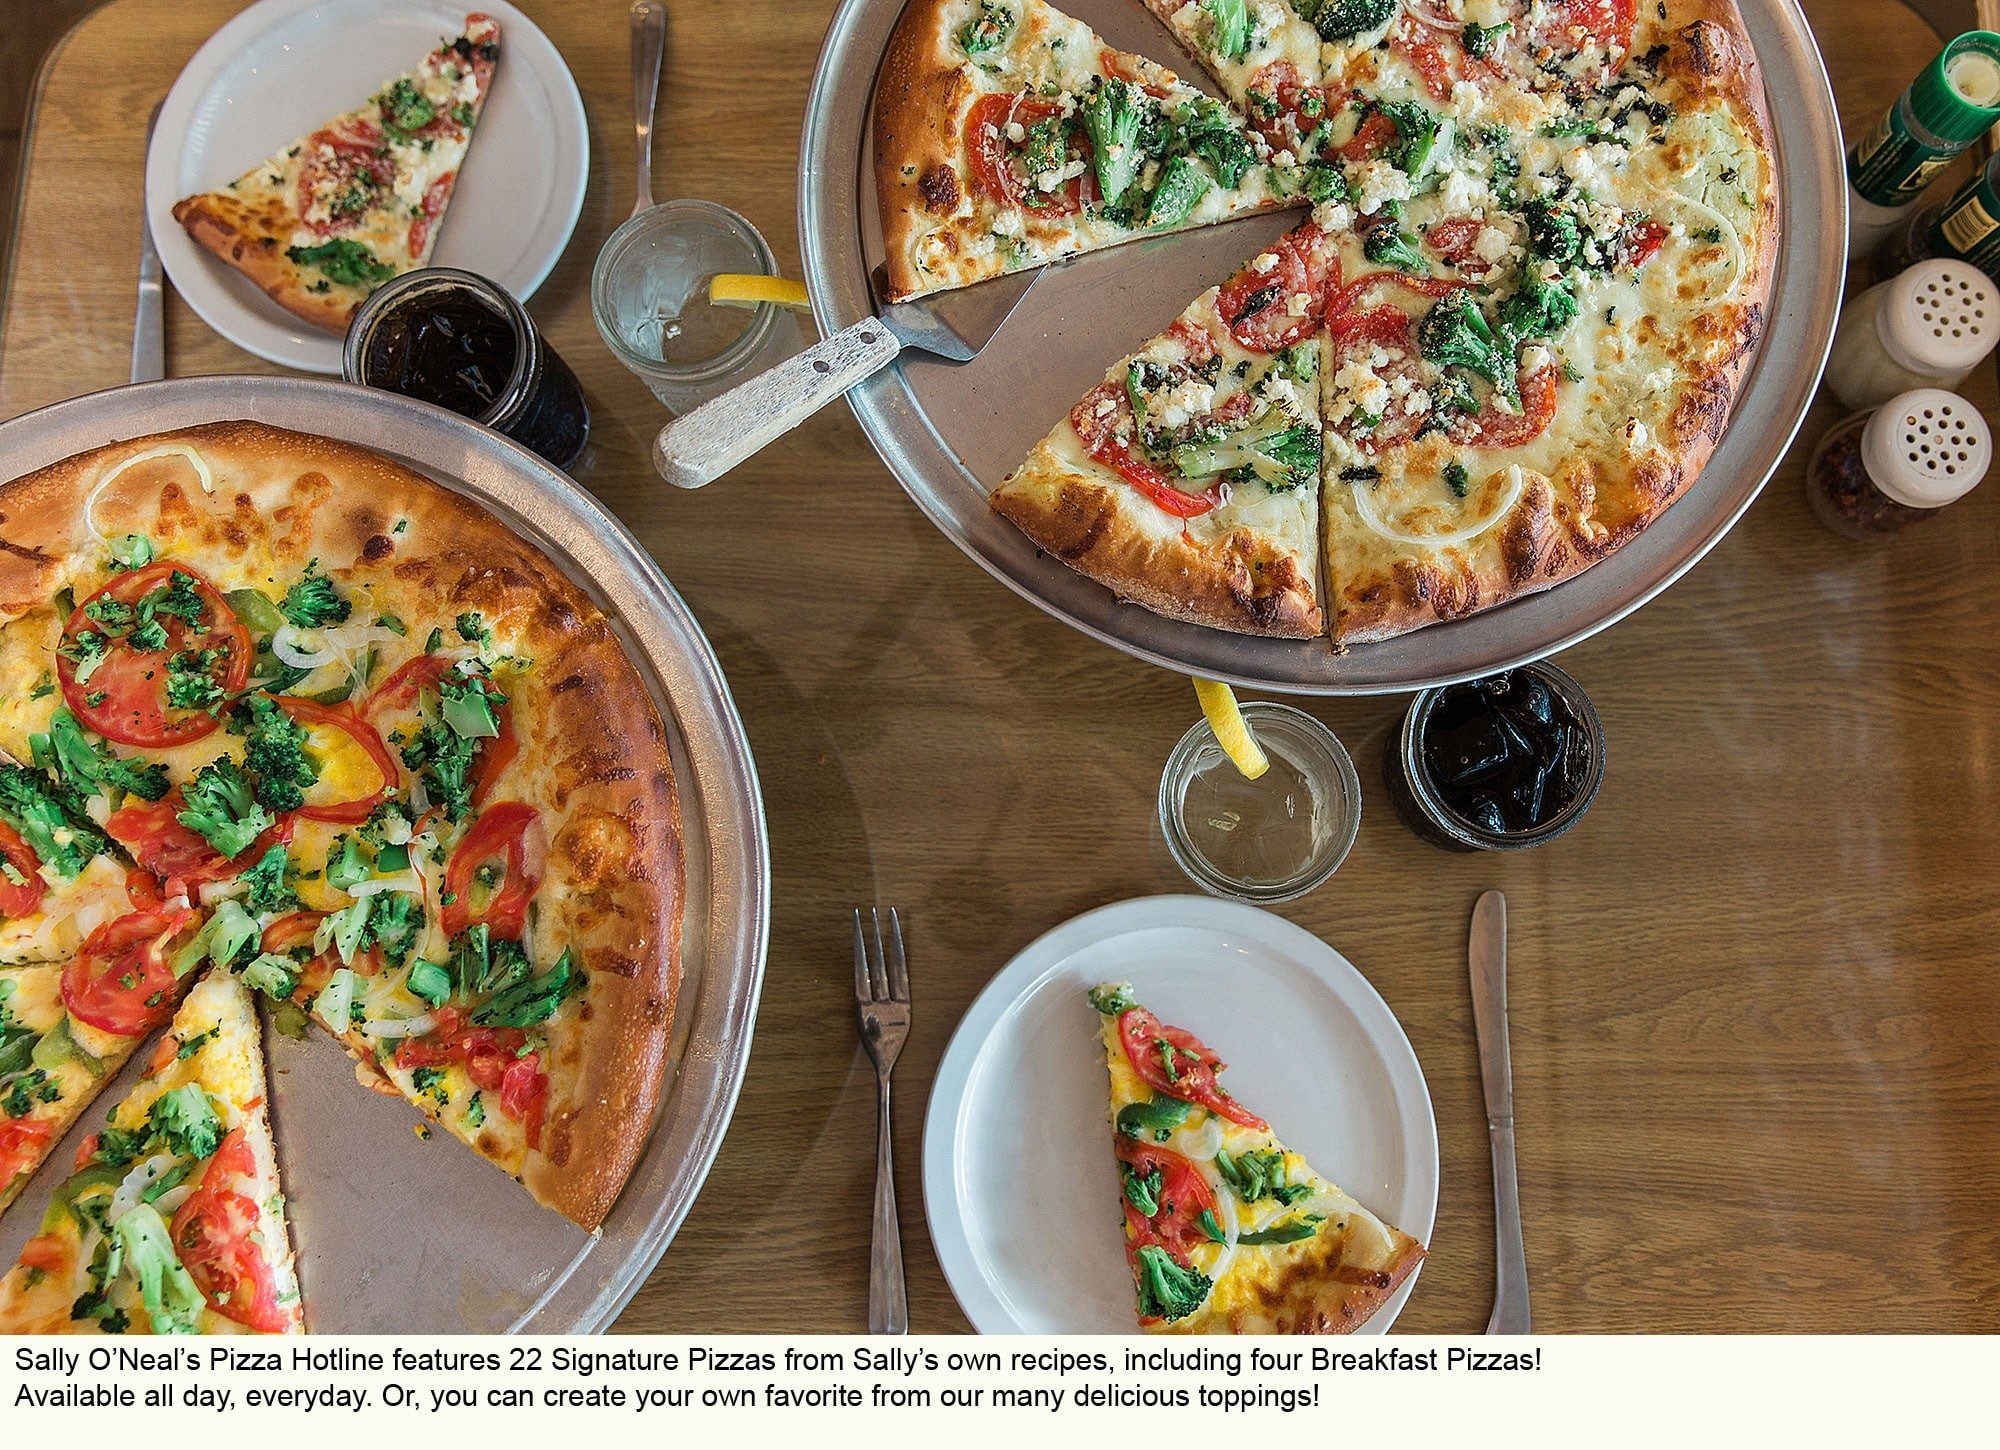 Sally O'Neal's Pizza Hotline features 22 Signature Pizzas from Sally's own recipes, including four Breakfast Pizzas! Or, create your own favorite!